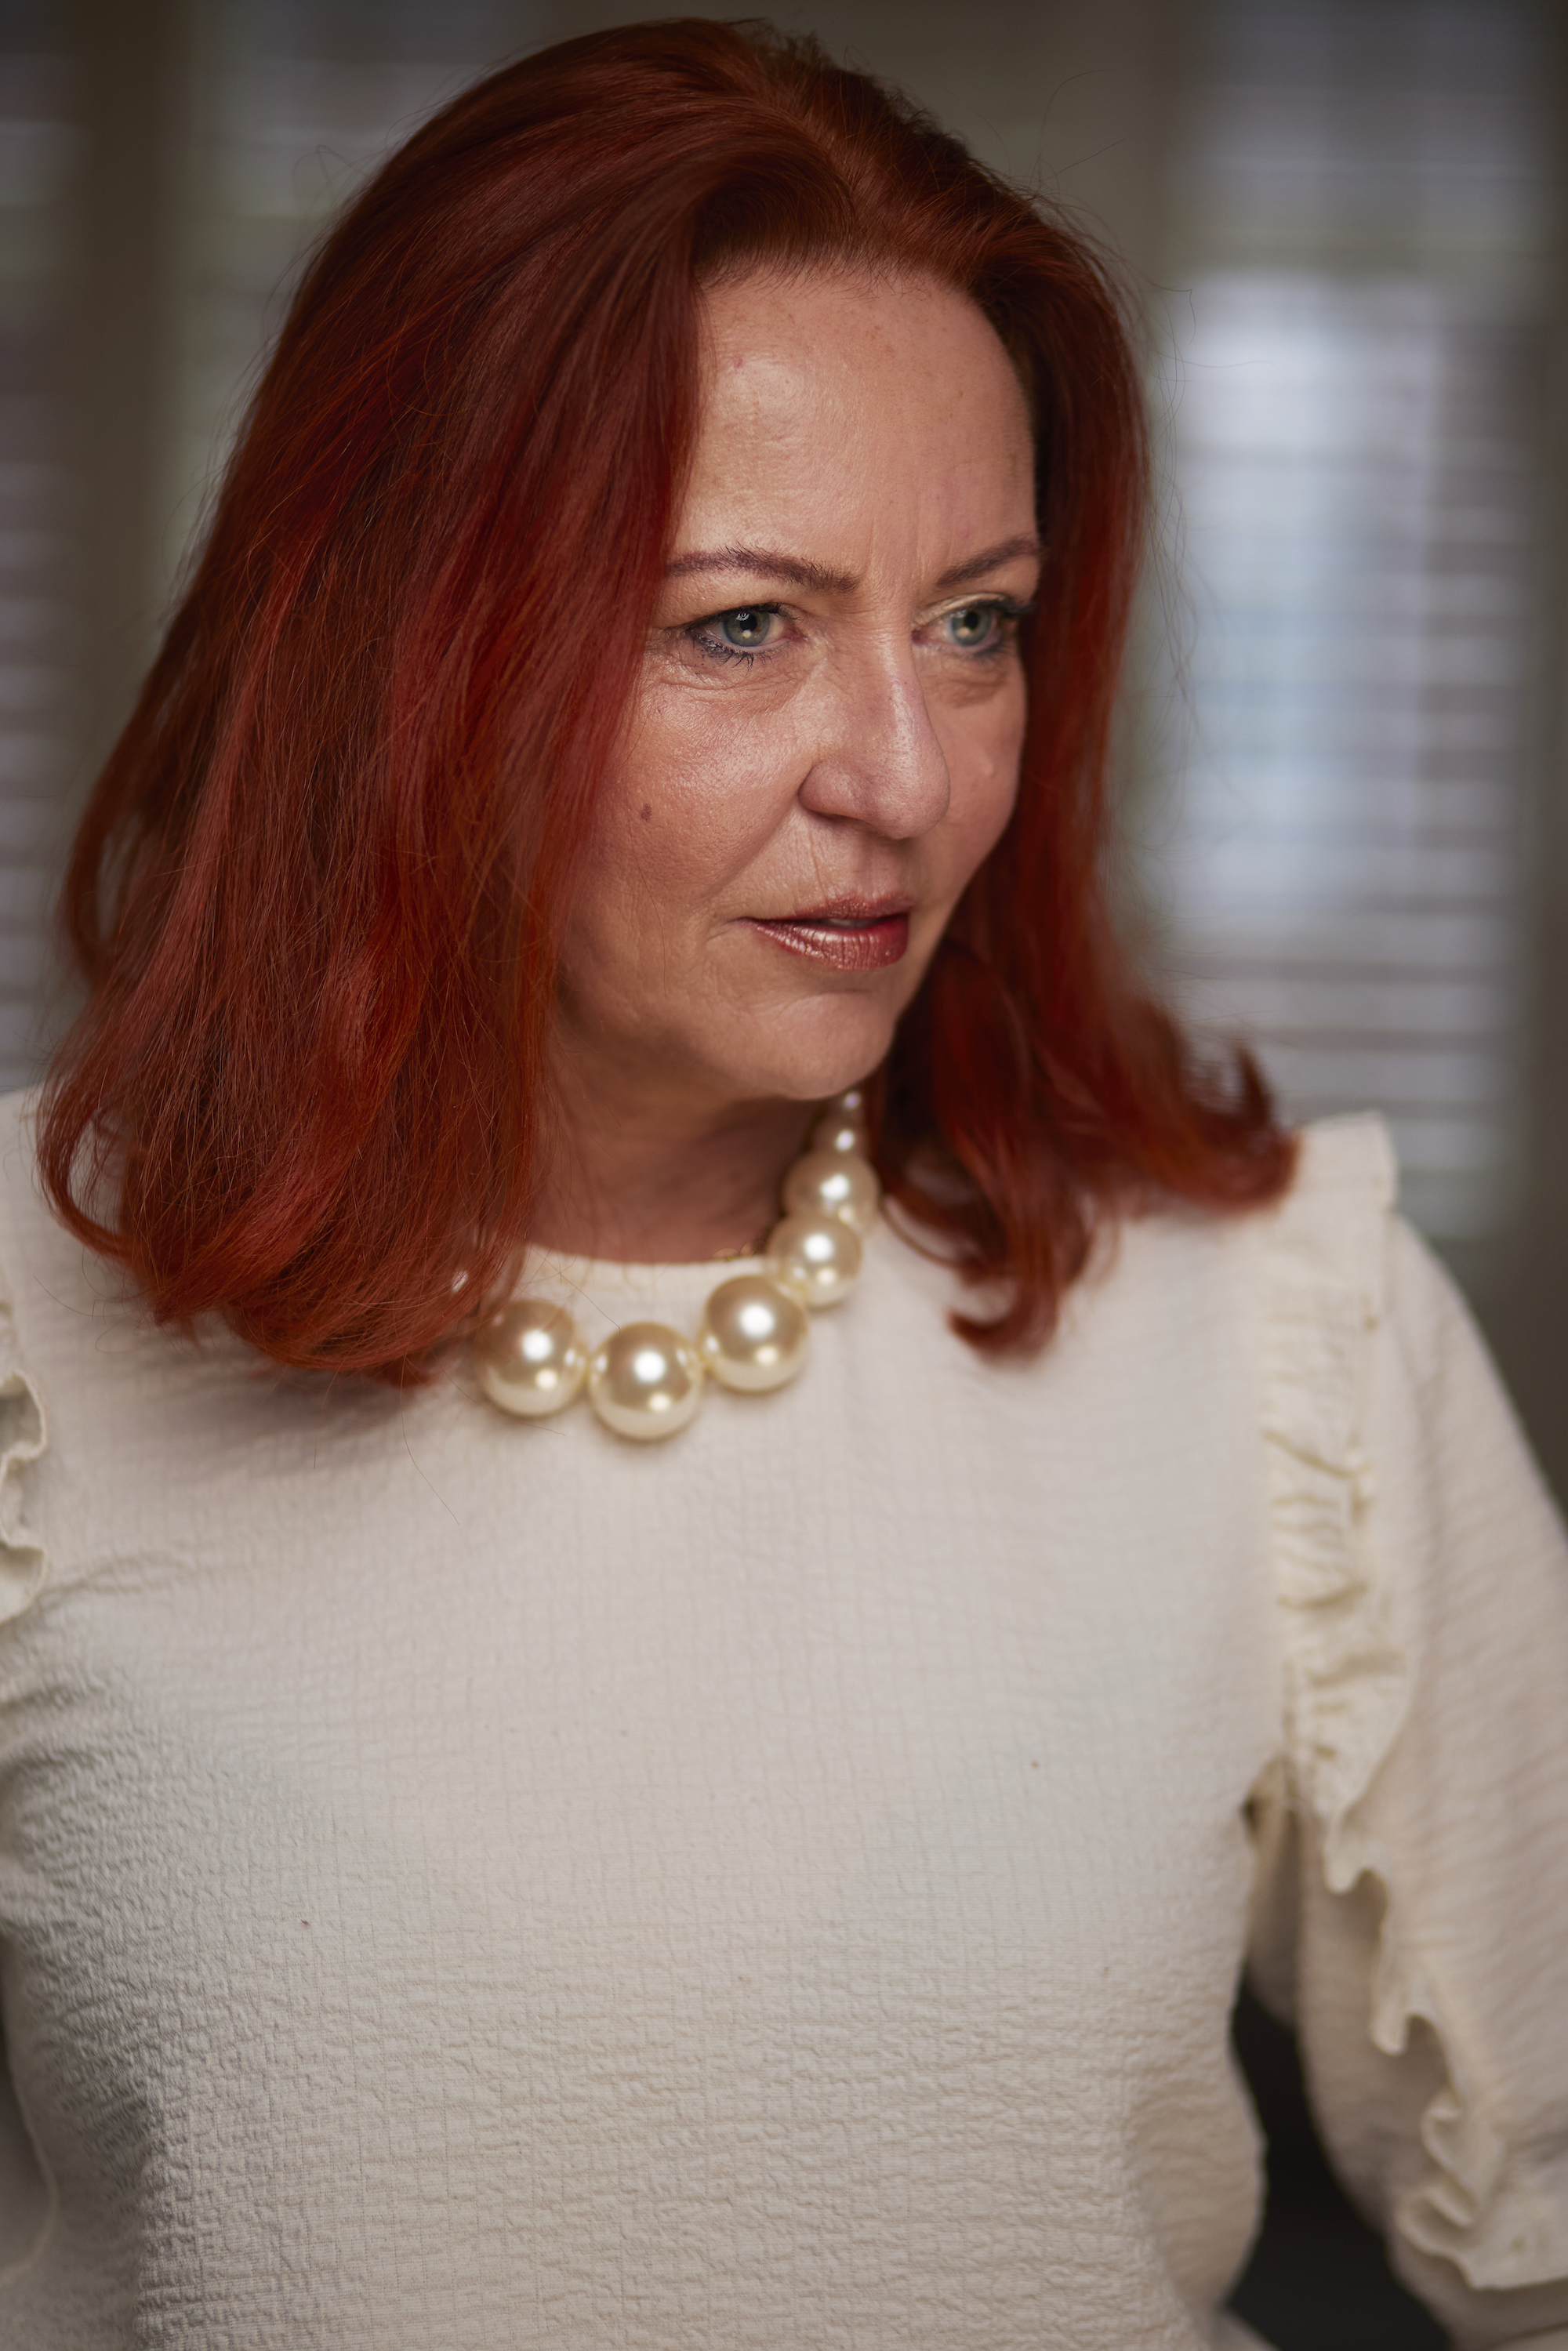 portrait of a woman with long, red hair and blue eyes wearing a big necklace with pearls and a white blouse.